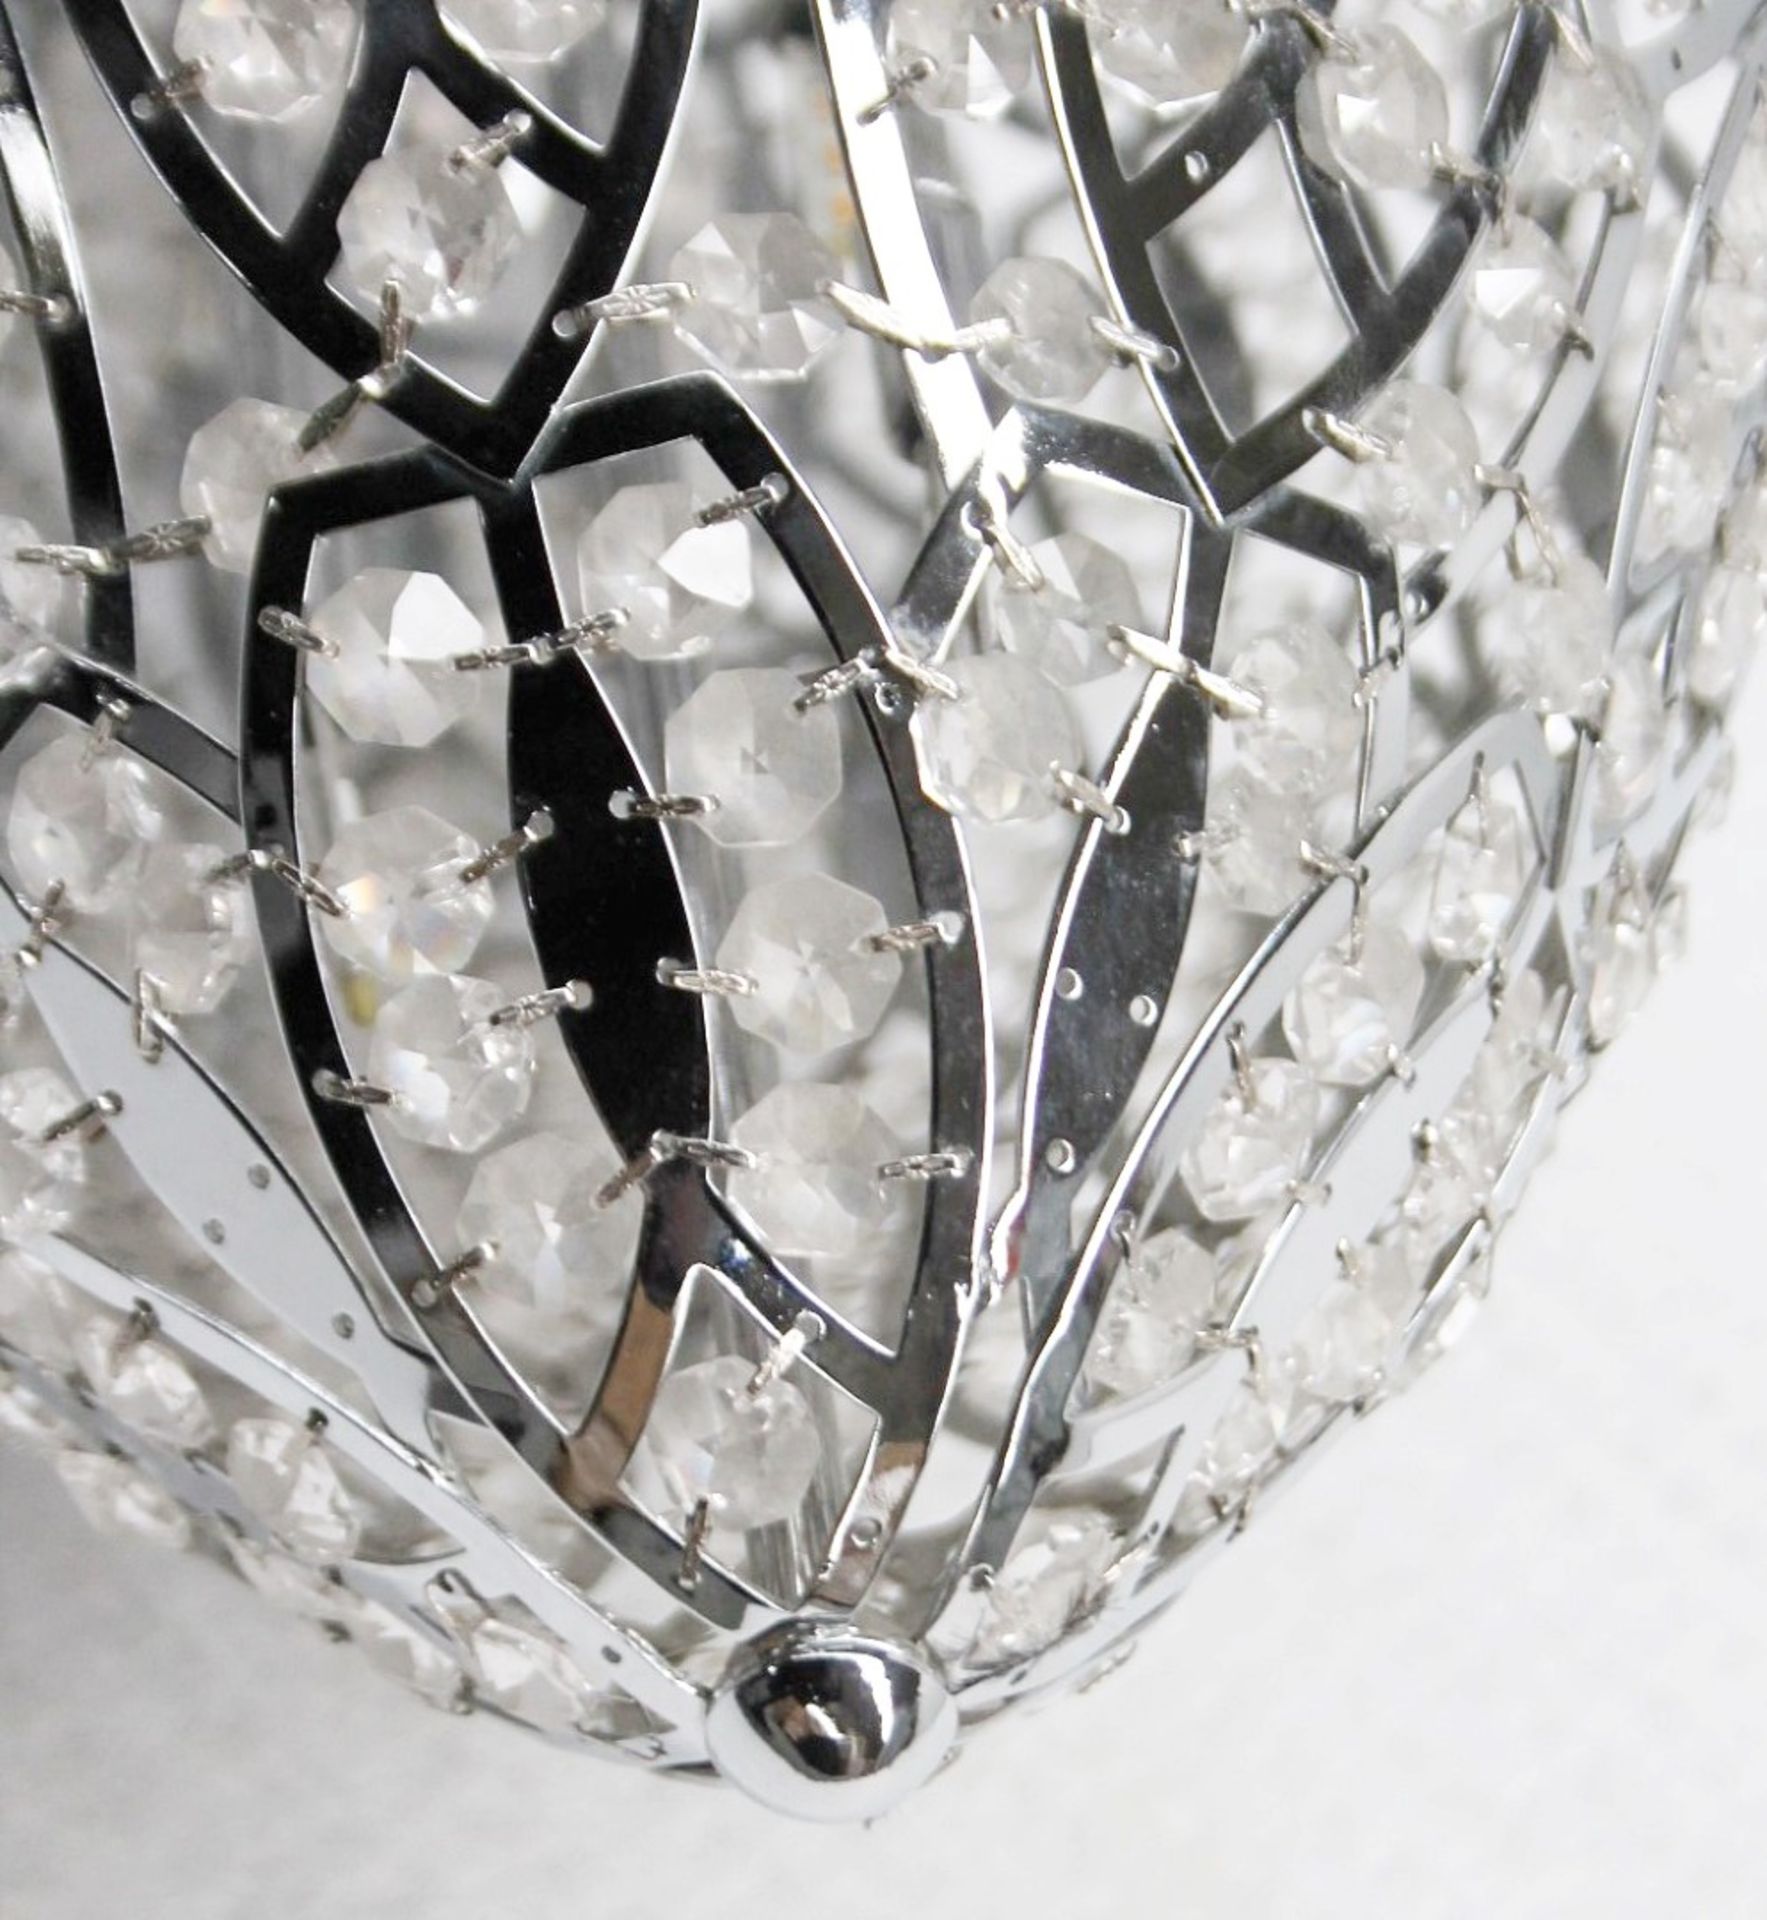 1 x High-end Italian LED Egg-Shaped Light Fitting Encrusted In Premium ASFOUR Crystals - RRP £4,000 - Image 5 of 9